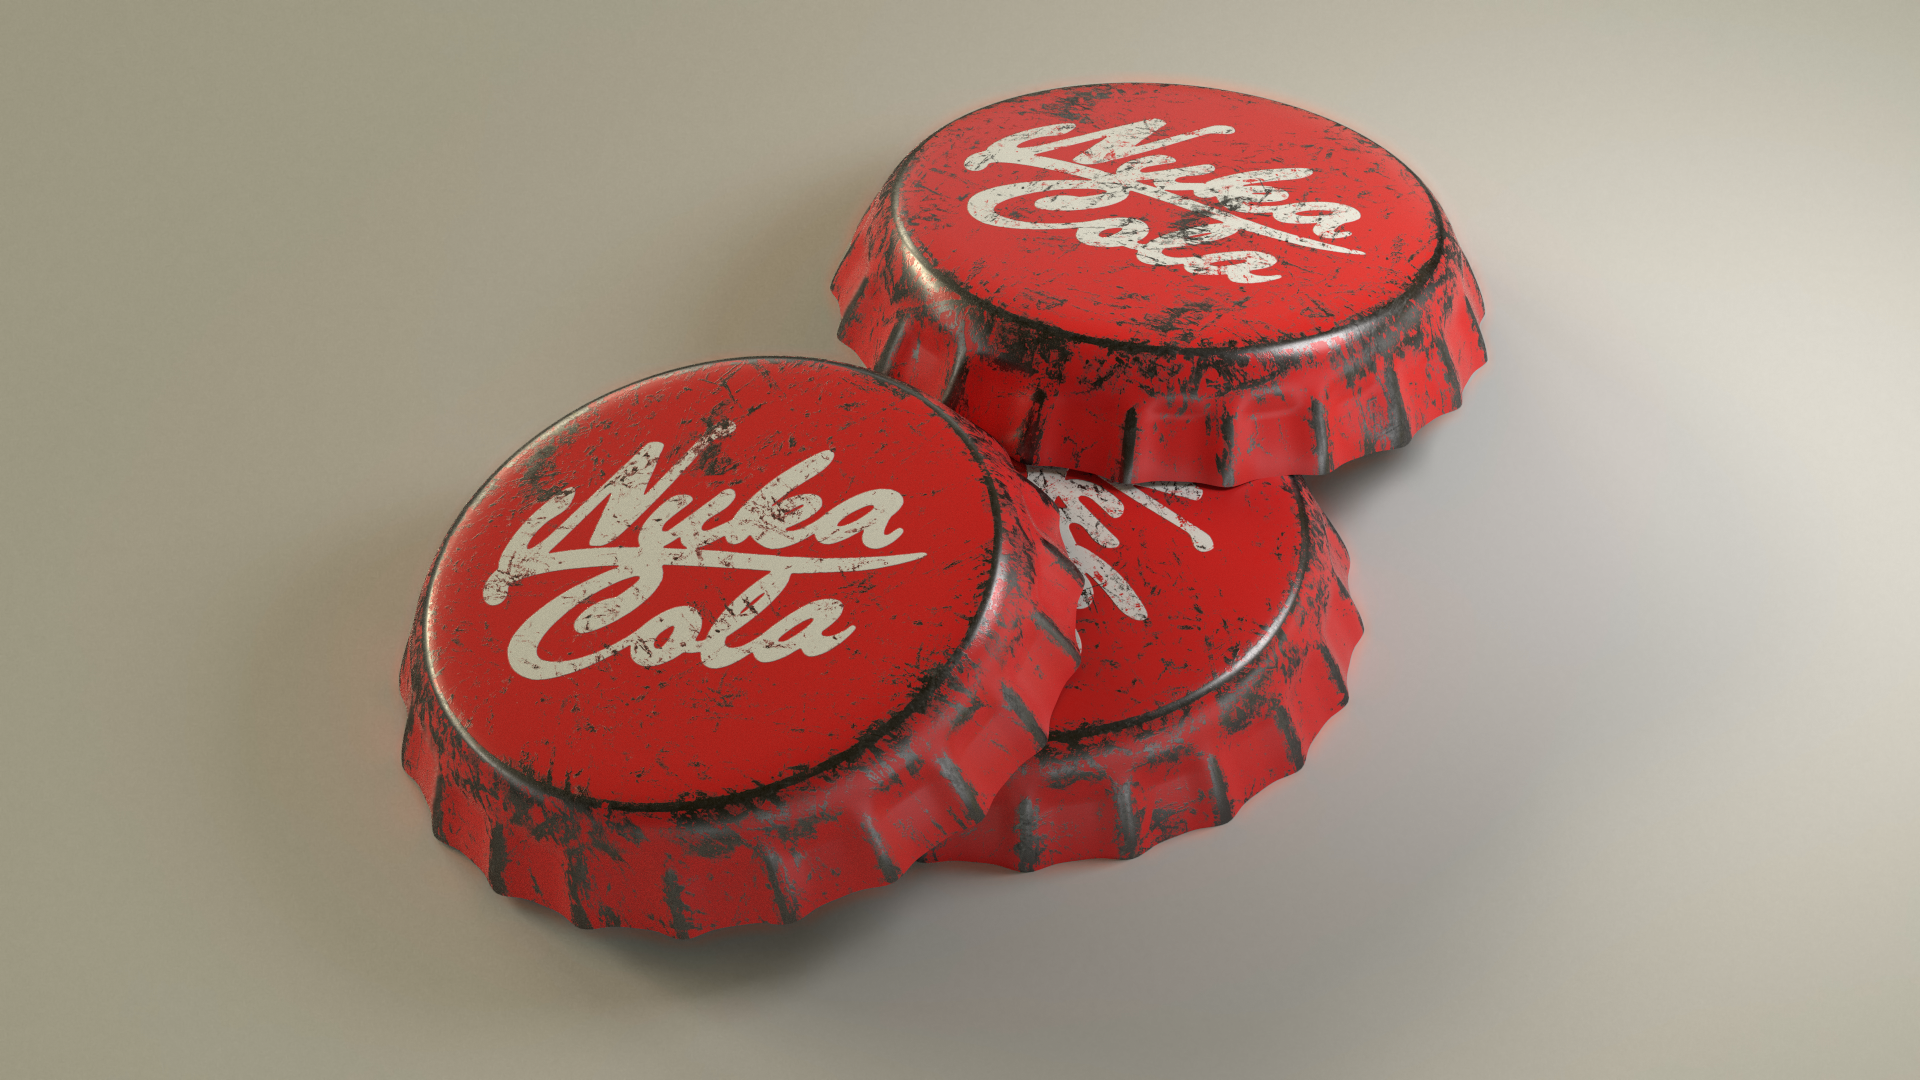 General 1920x1080 Fallout 3 Nuka Cola Bottle Caps Fallout video game art red Bottle Tops PC gaming video games simple background